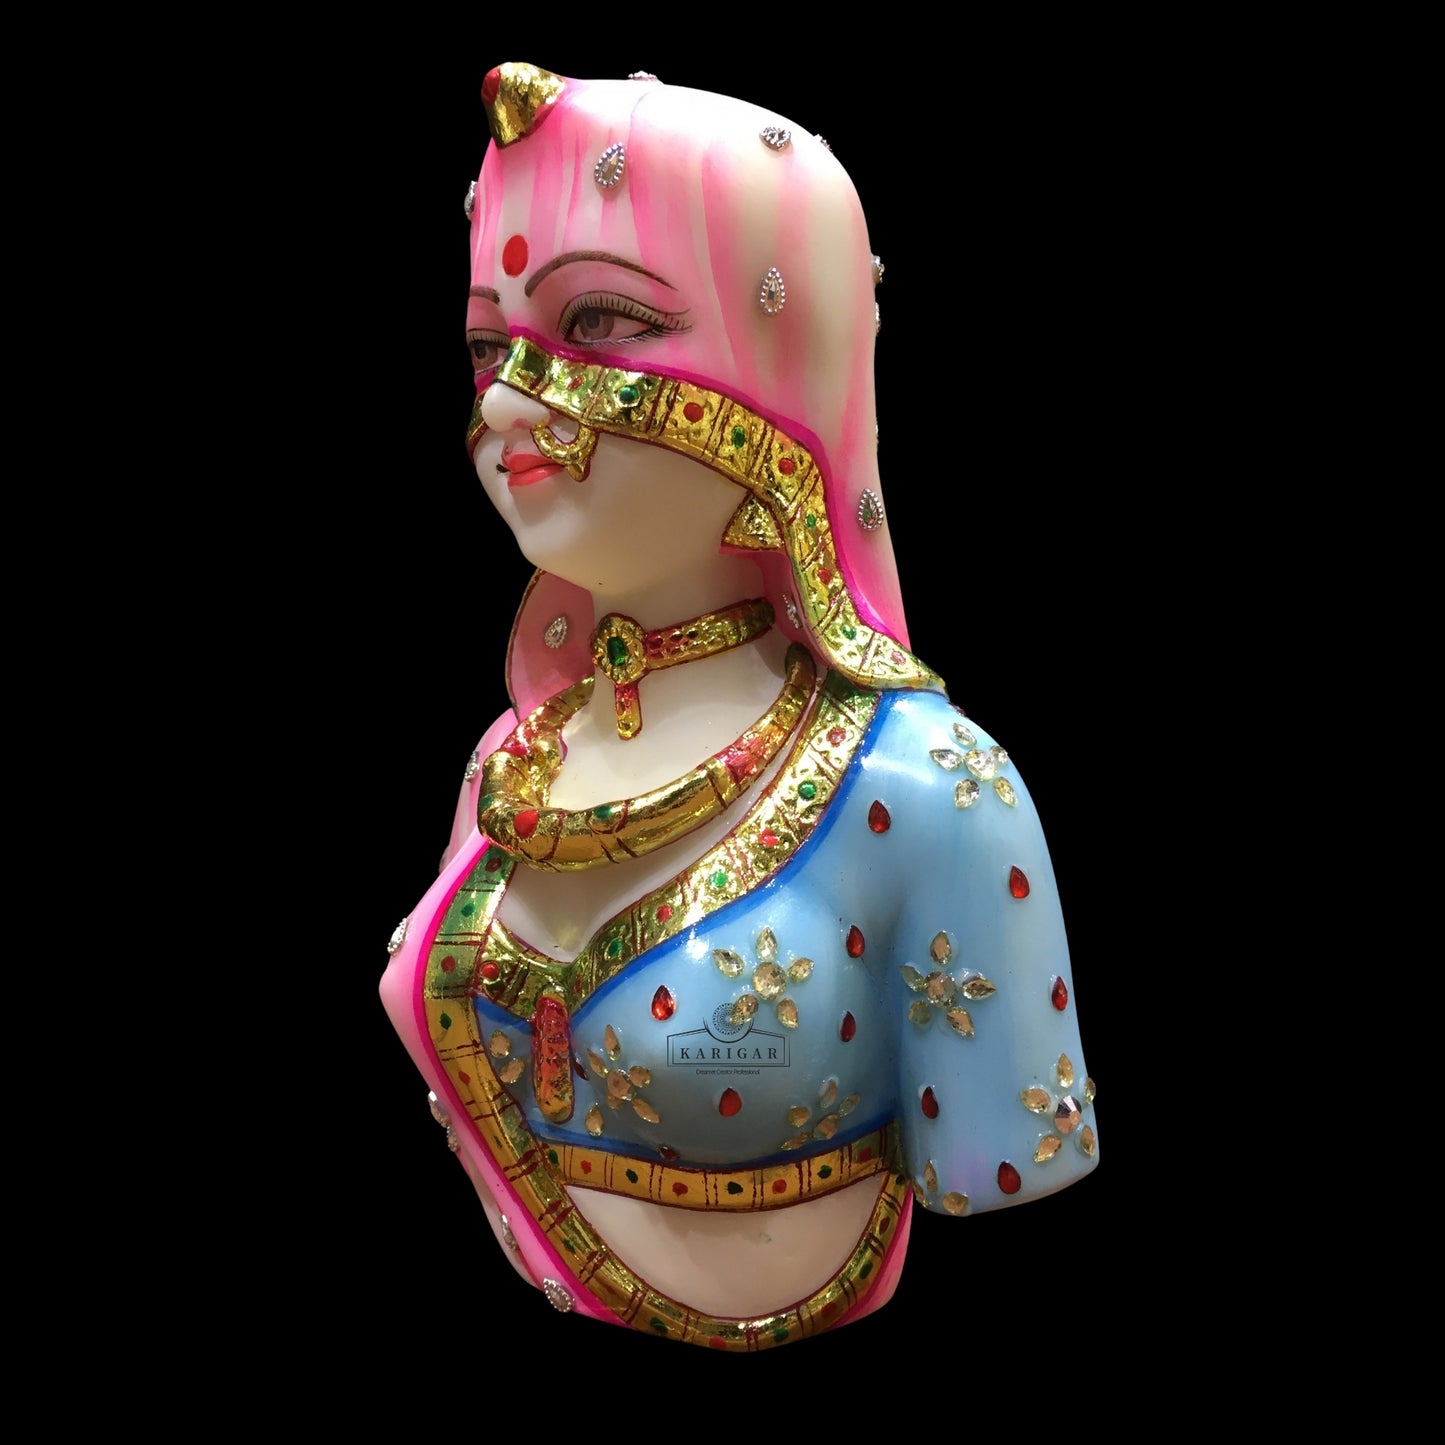 Bani Thani Bust Statue, Large 9 inches Murti, The Indian Mona Lisa Bust Marble Sculpture, Traditional Indian Women Figurine Bust, Multicolor Jewelry Clothes Figurine - Home Office Decor Gifts (Pink)